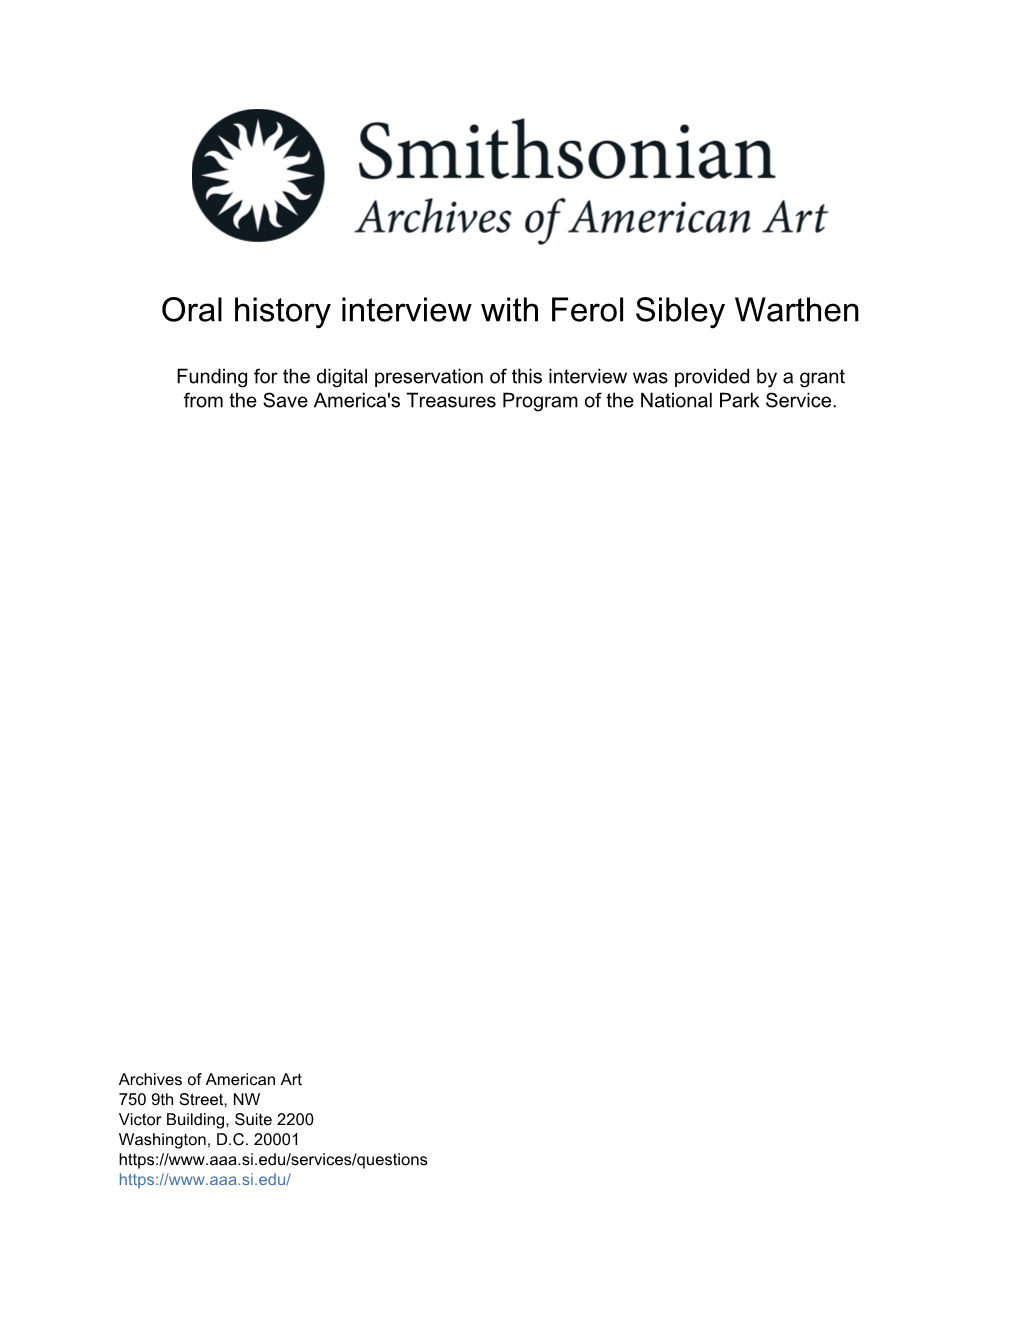 Oral History Interview with Ferol Sibley Warthen